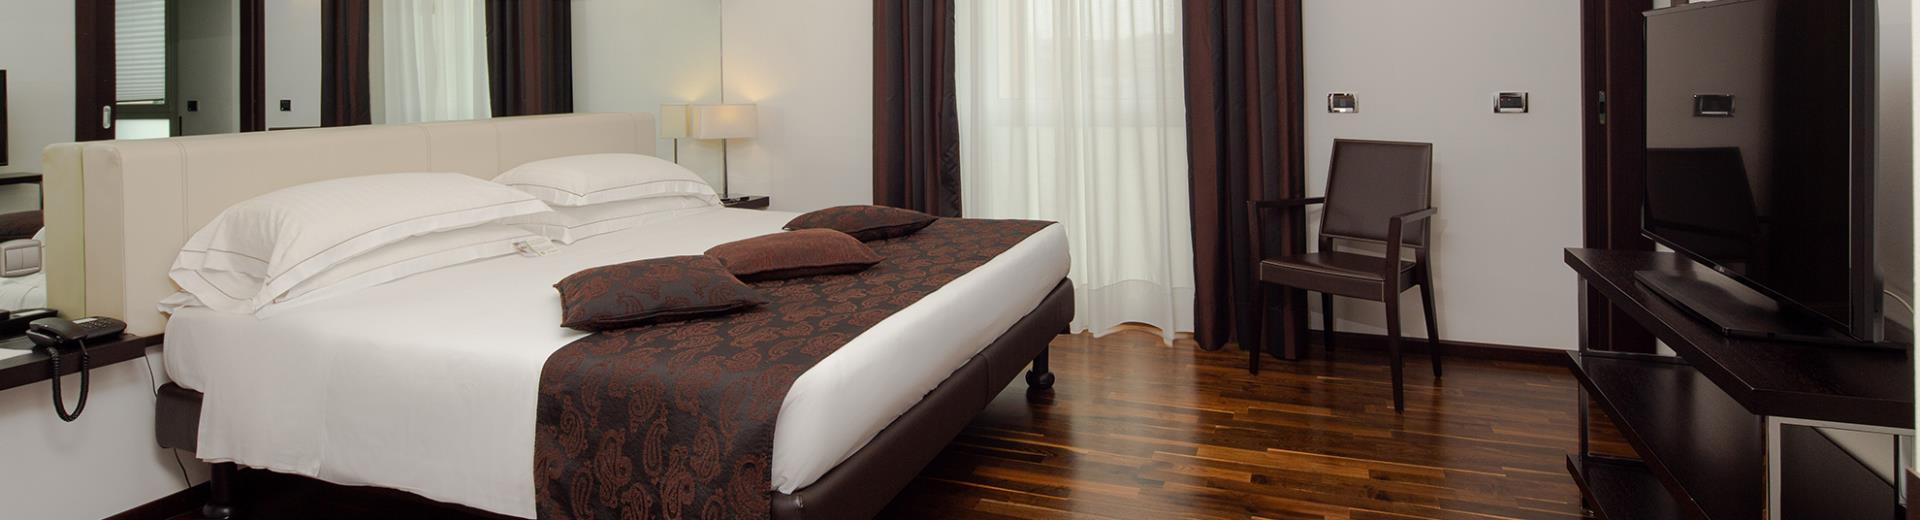 Discover all the comfort of the Best Western Hotel Biri Suites, 4 stars in Padua!